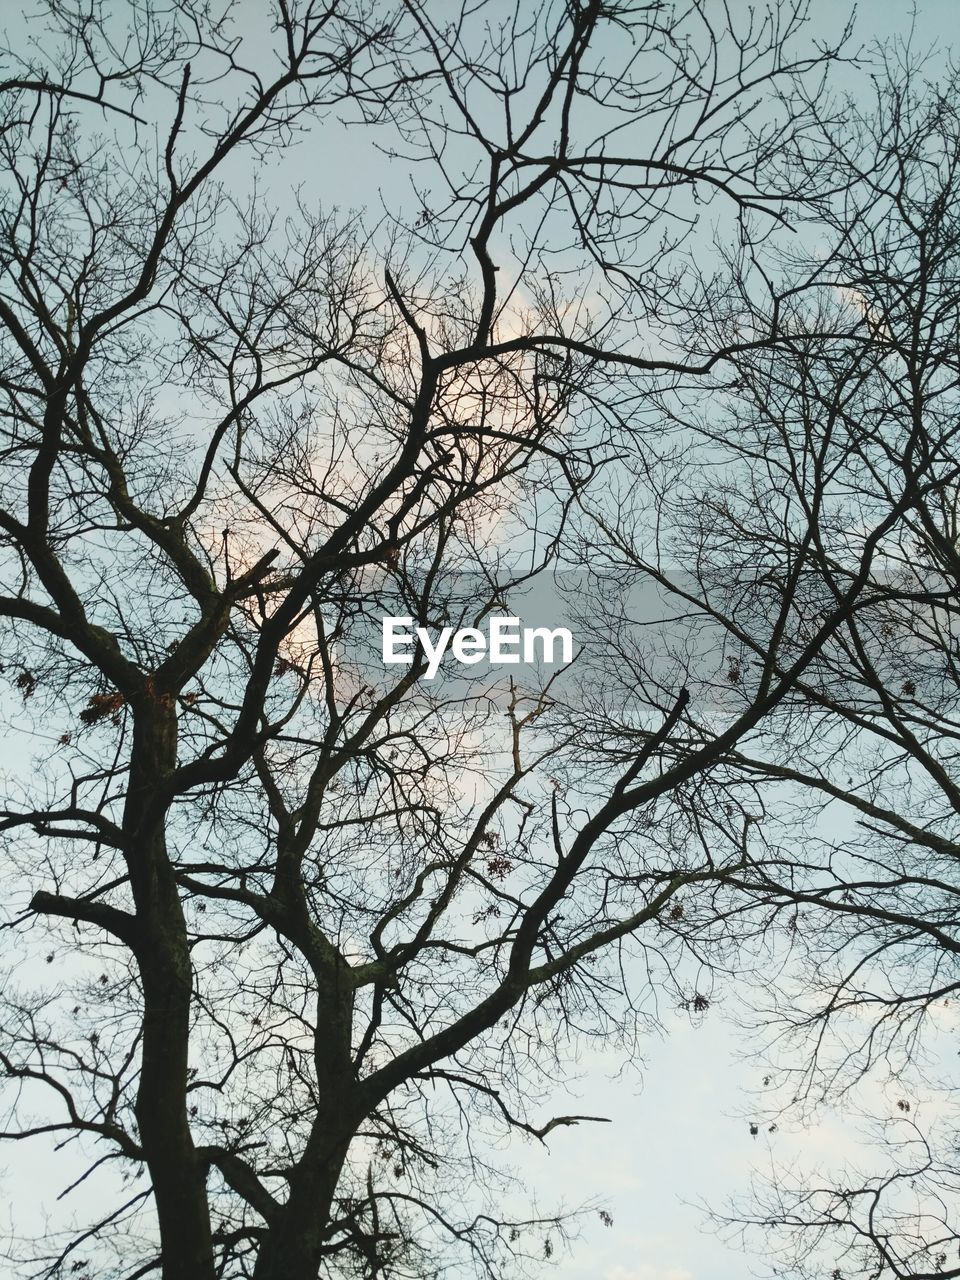 LOW ANGLE VIEW OF BIRD ON TREE AGAINST SKY